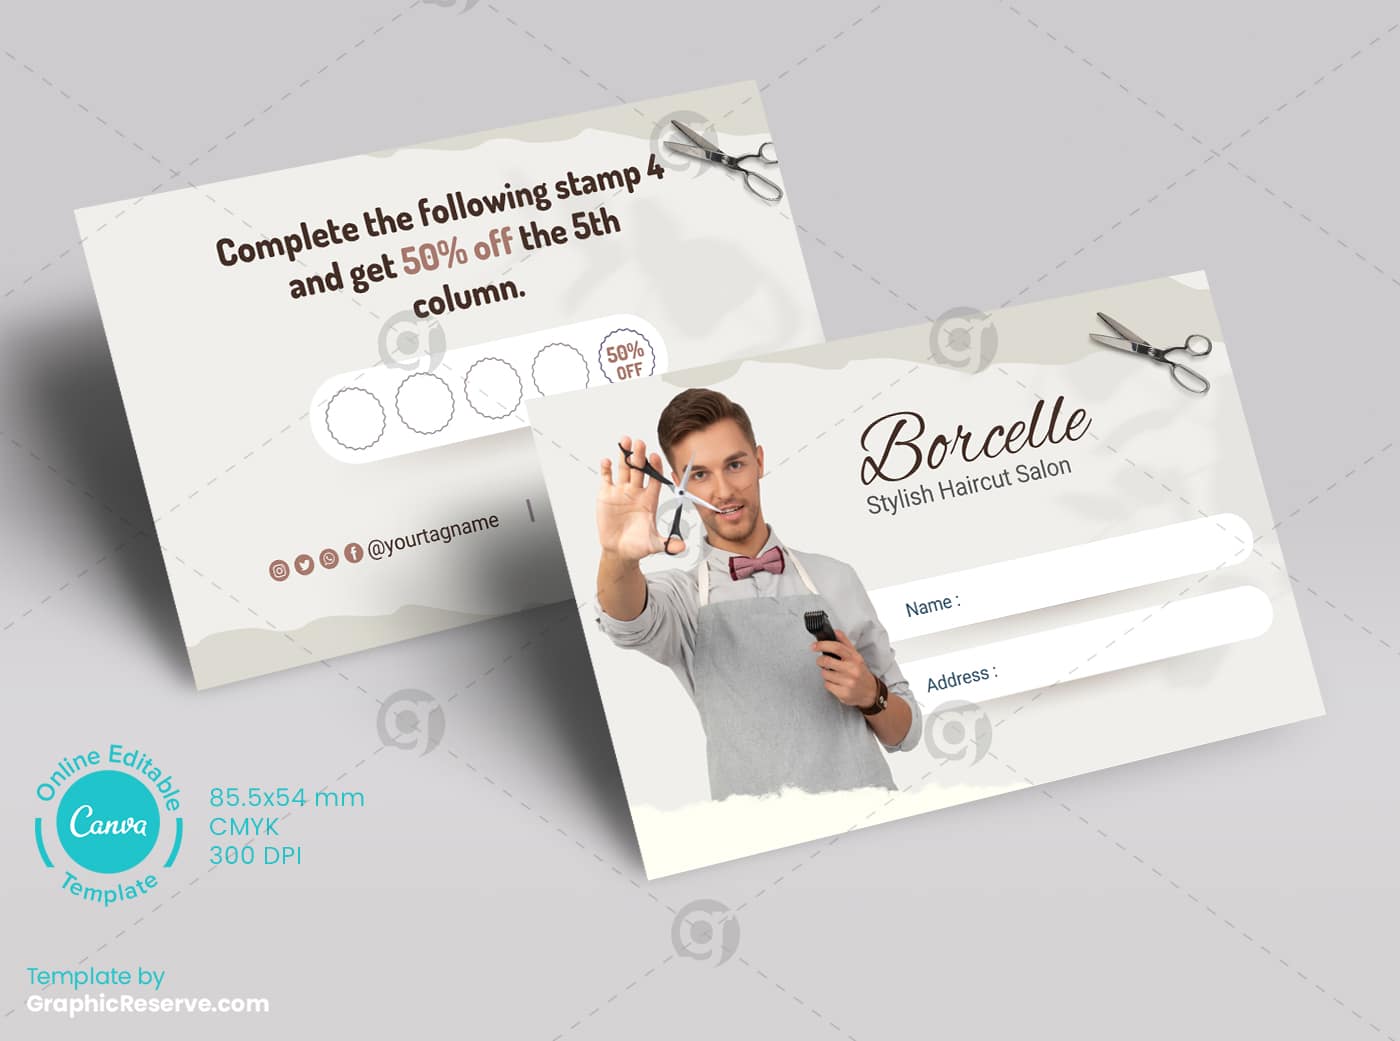 Vintage Loyalty Card Design Example and Template Download